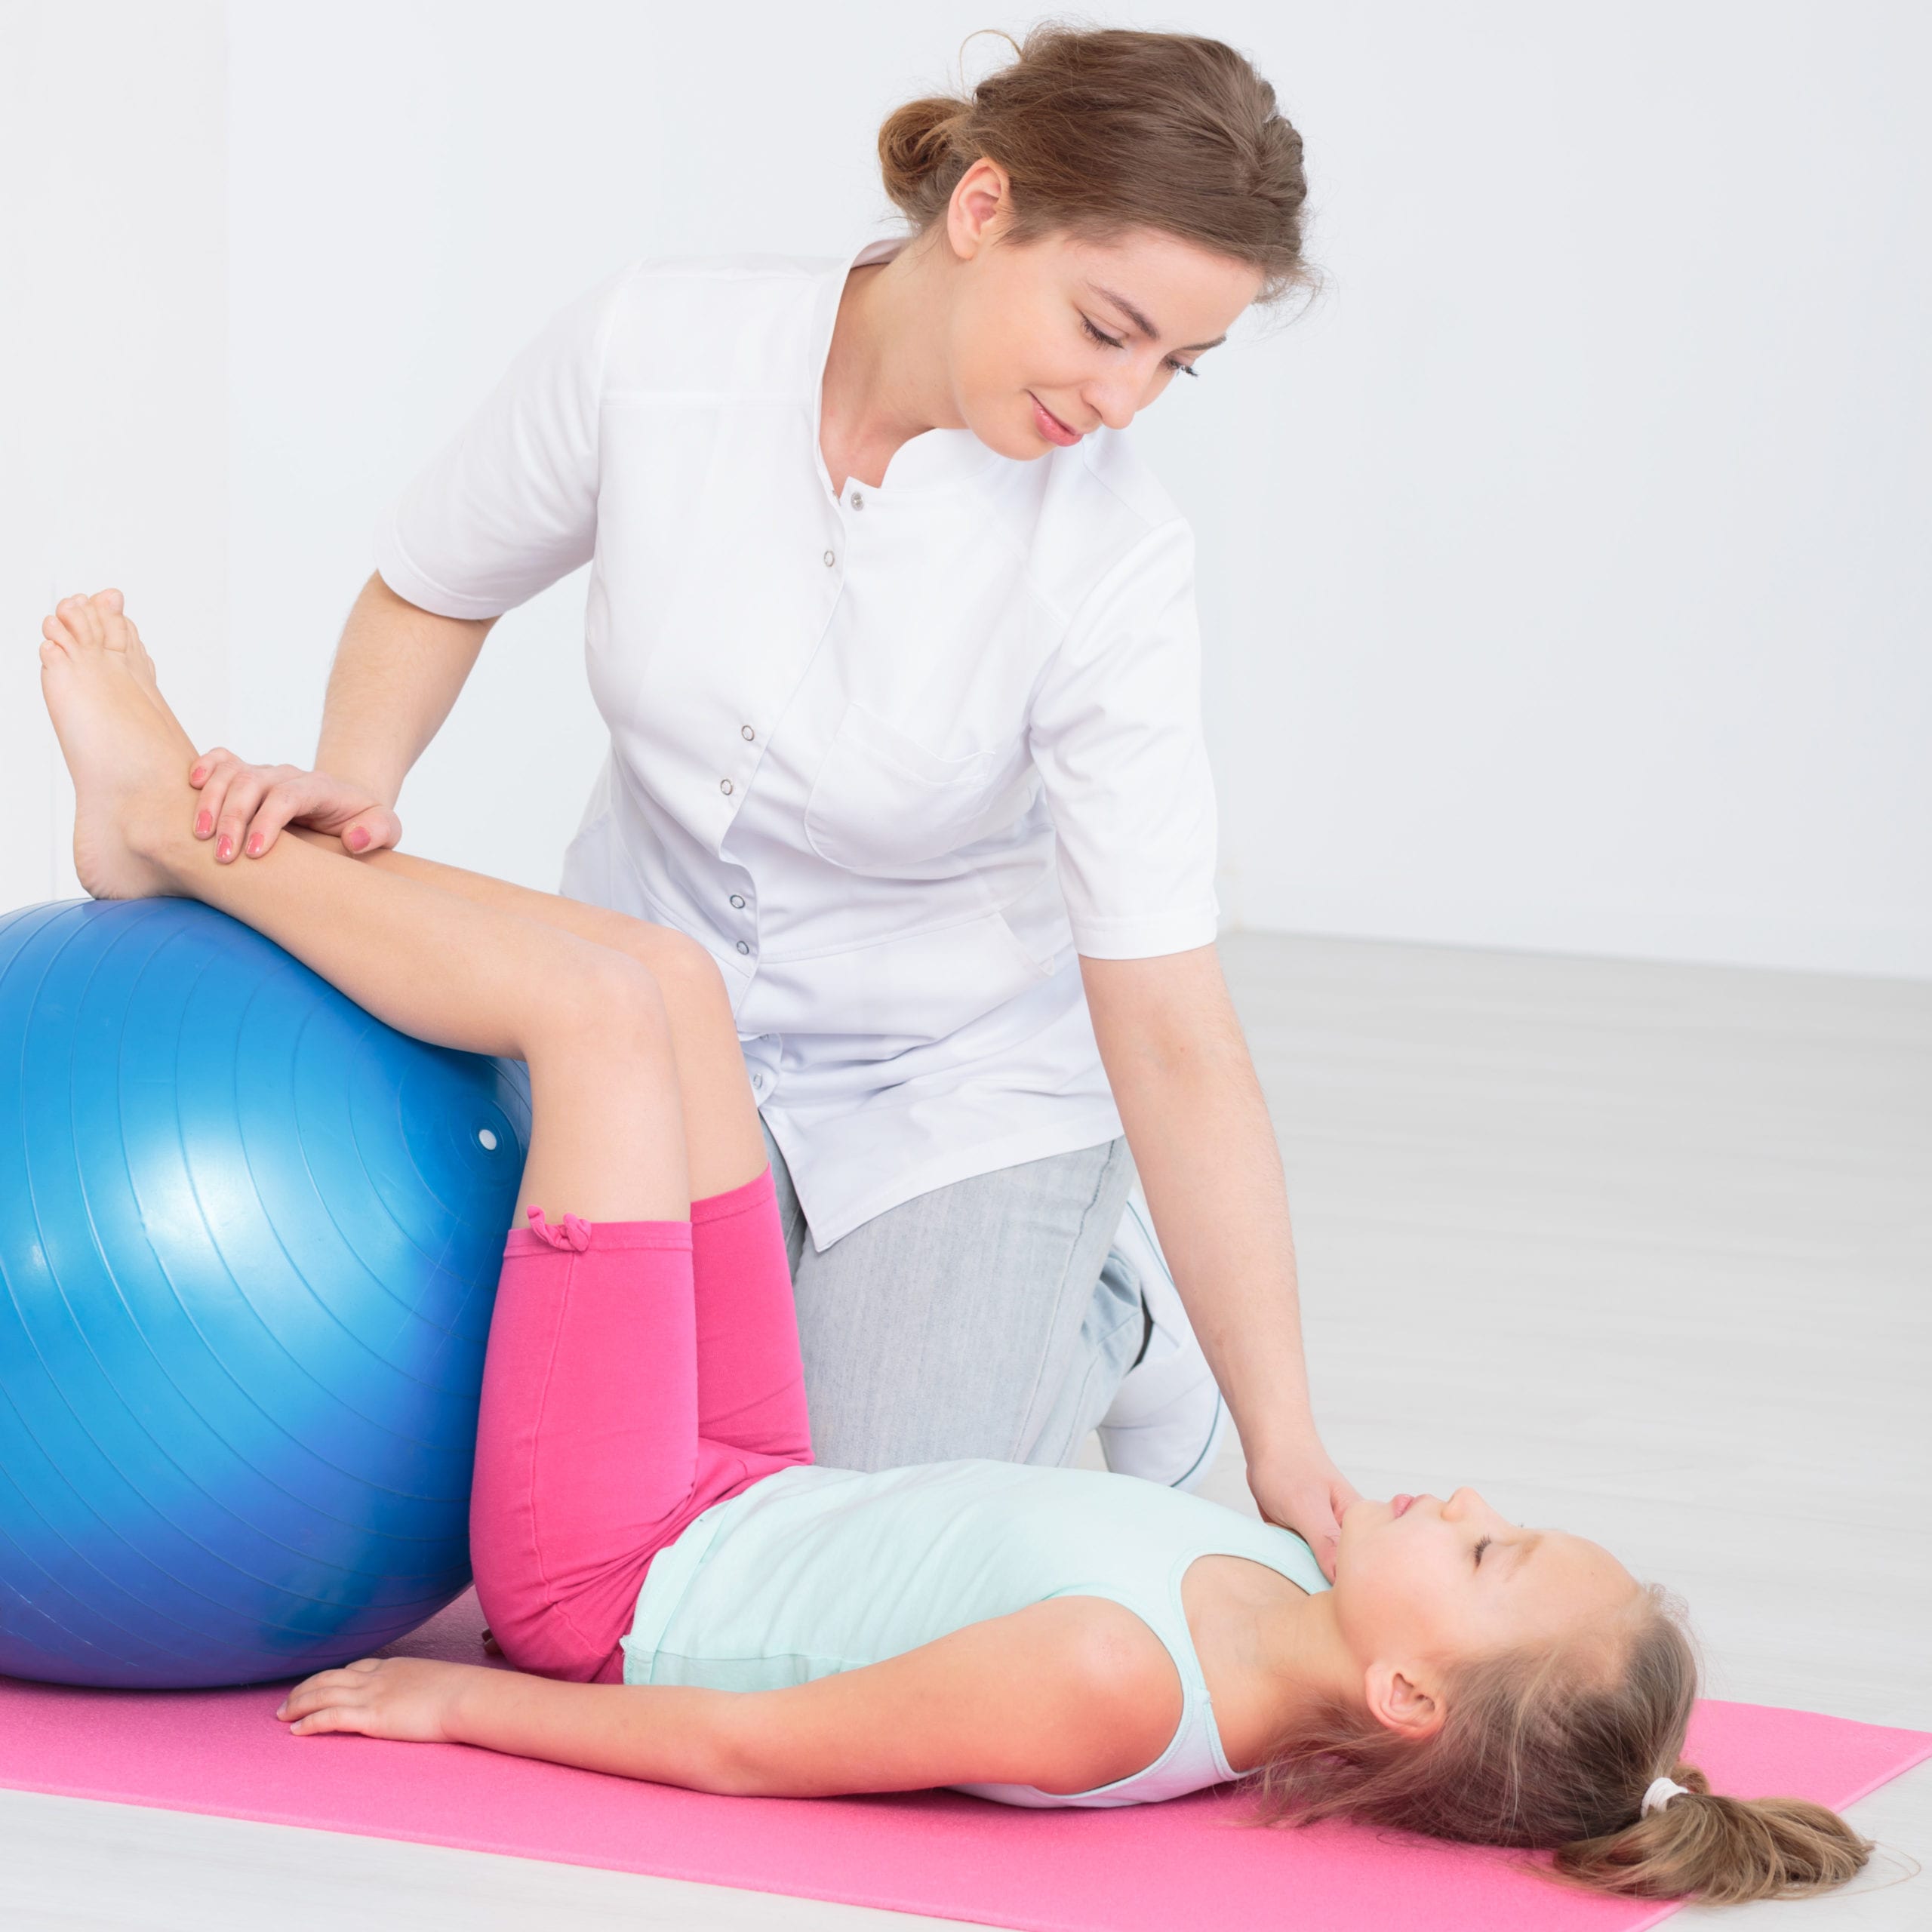 Pediatric Pelvic Floor Therapy Services Physical Therapy in Motion Billings, MT